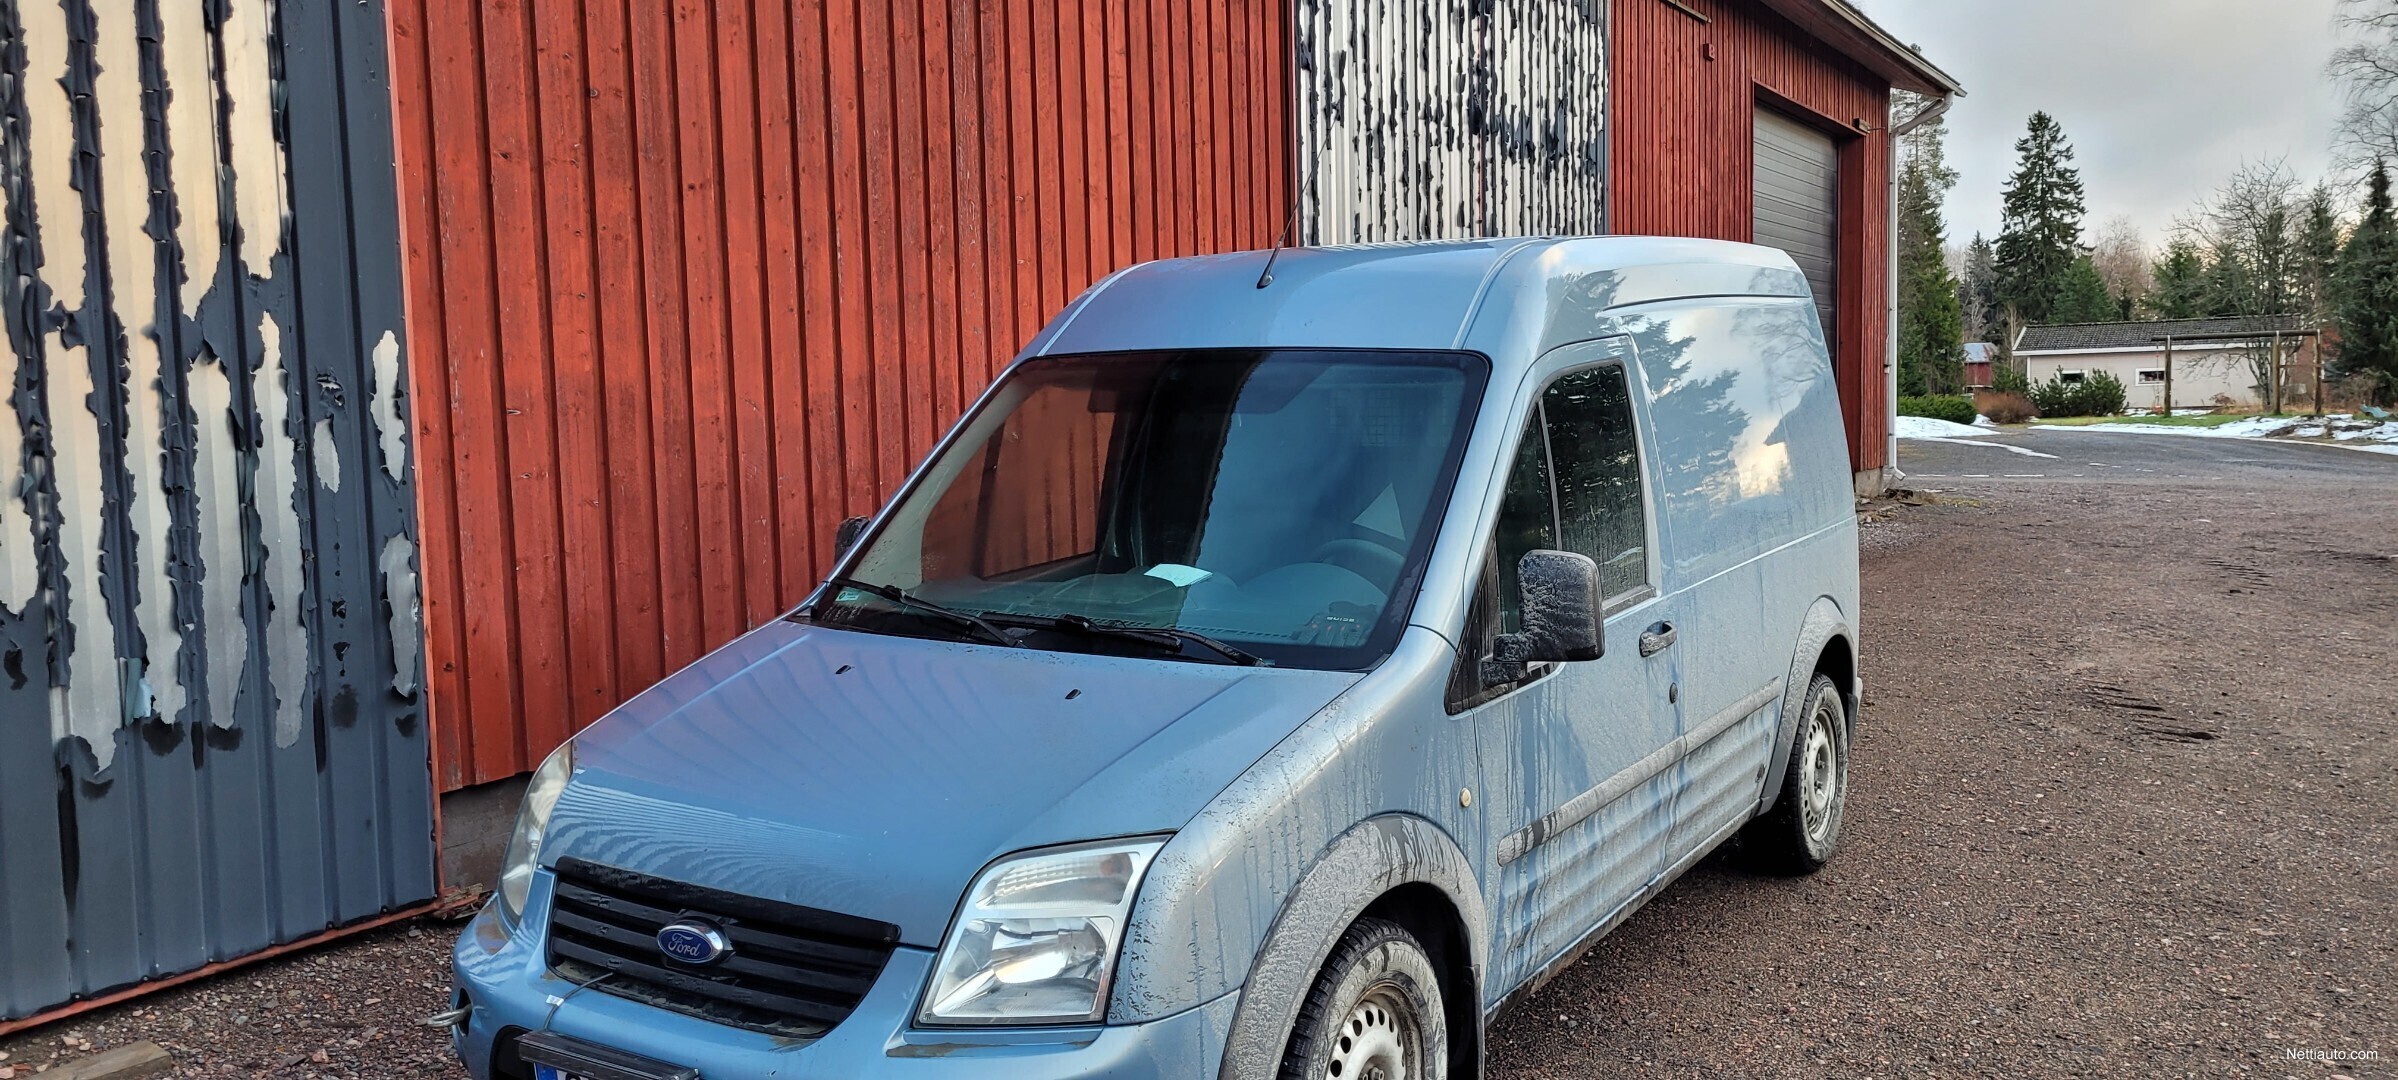 Ford Transit Connect TRANSIT CONNECT LWB 1,8 TDCi 110hv M5 Trend Other 2010  - Used vehicle - Nettiauto